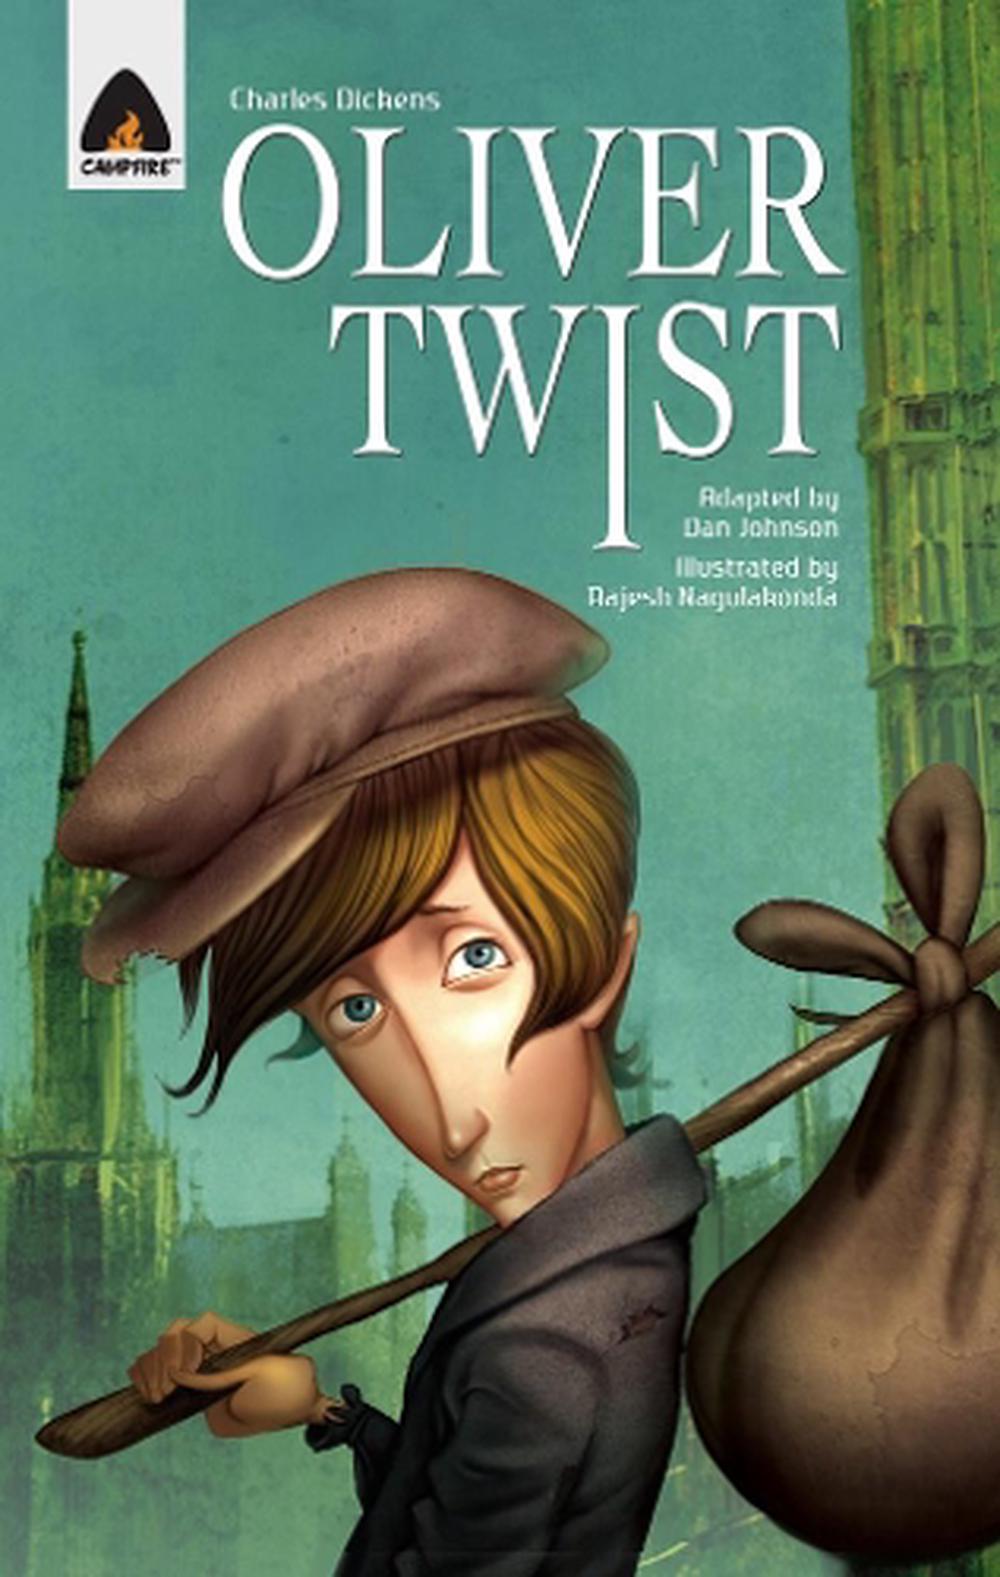 book review for oliver twist